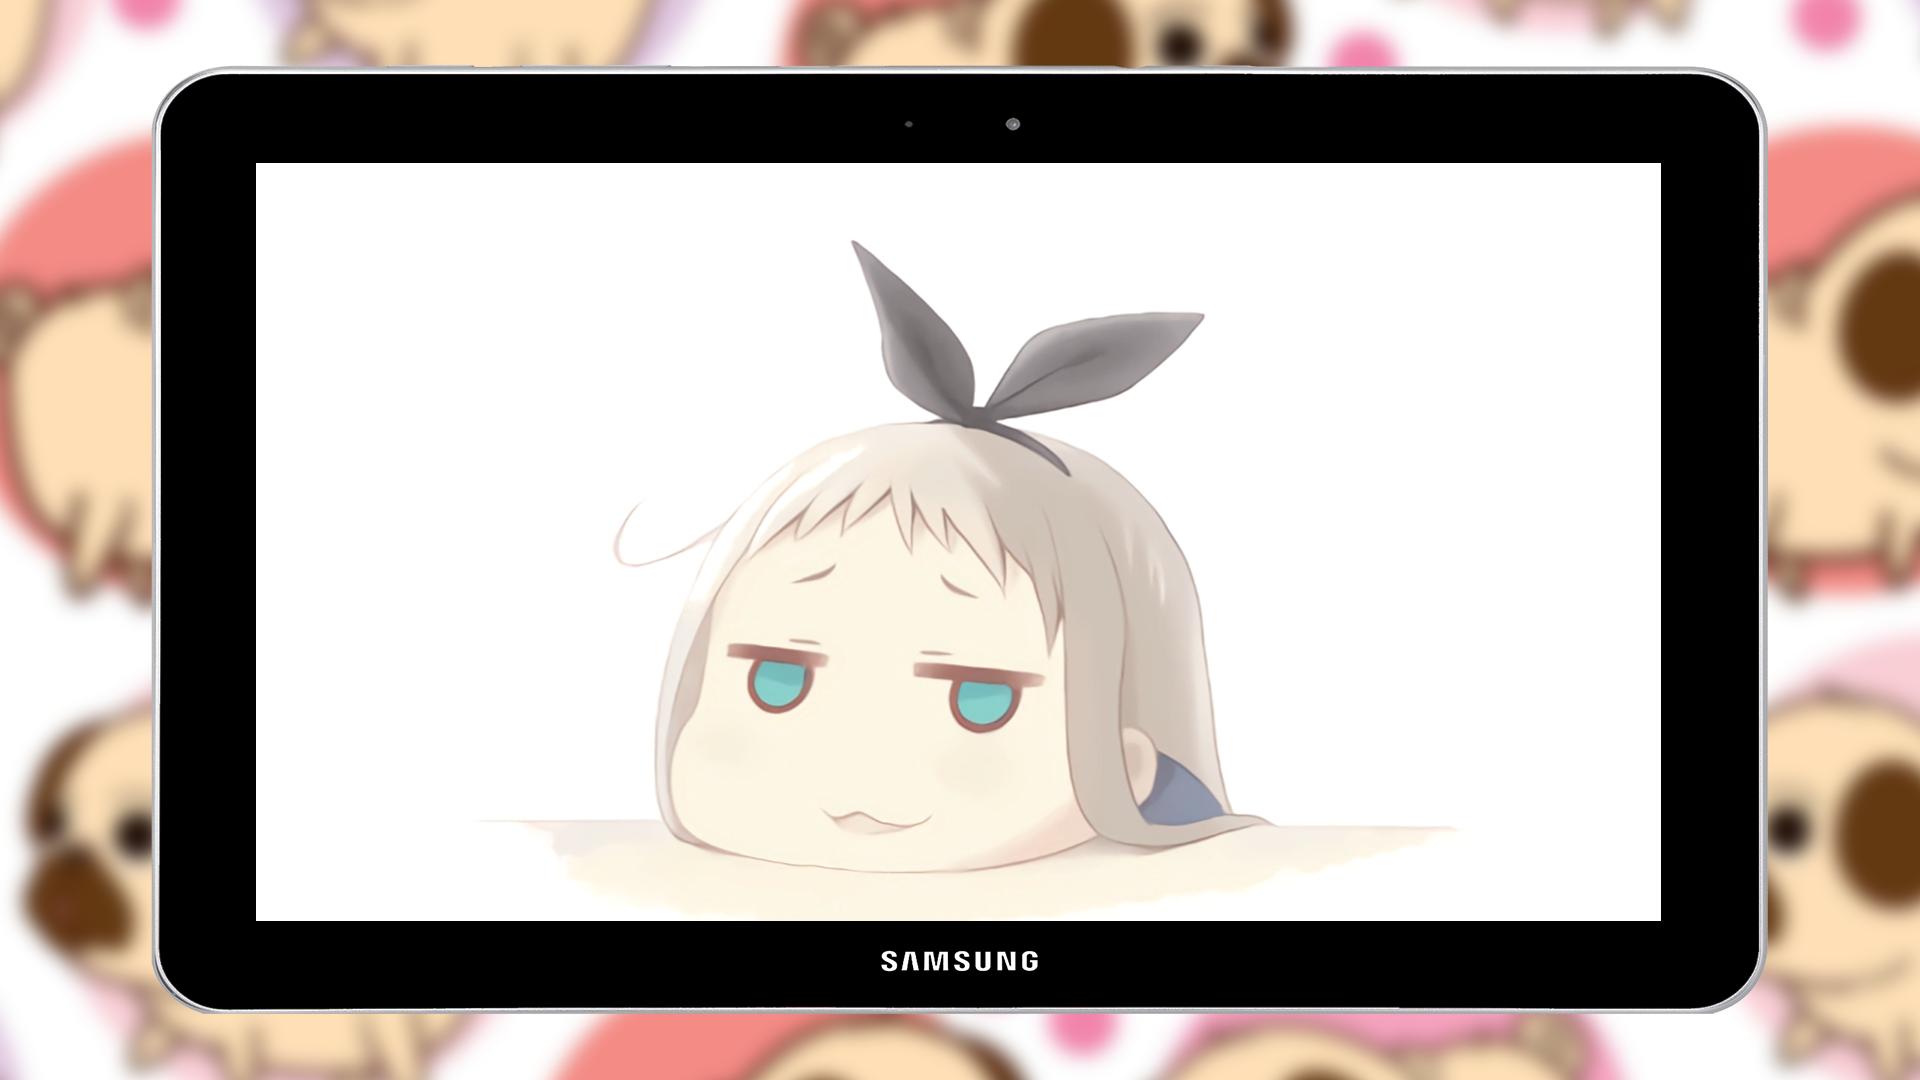 Hideri Kanzaki 神崎 ひでり Anime Live Wallpaper For Android Apk Download